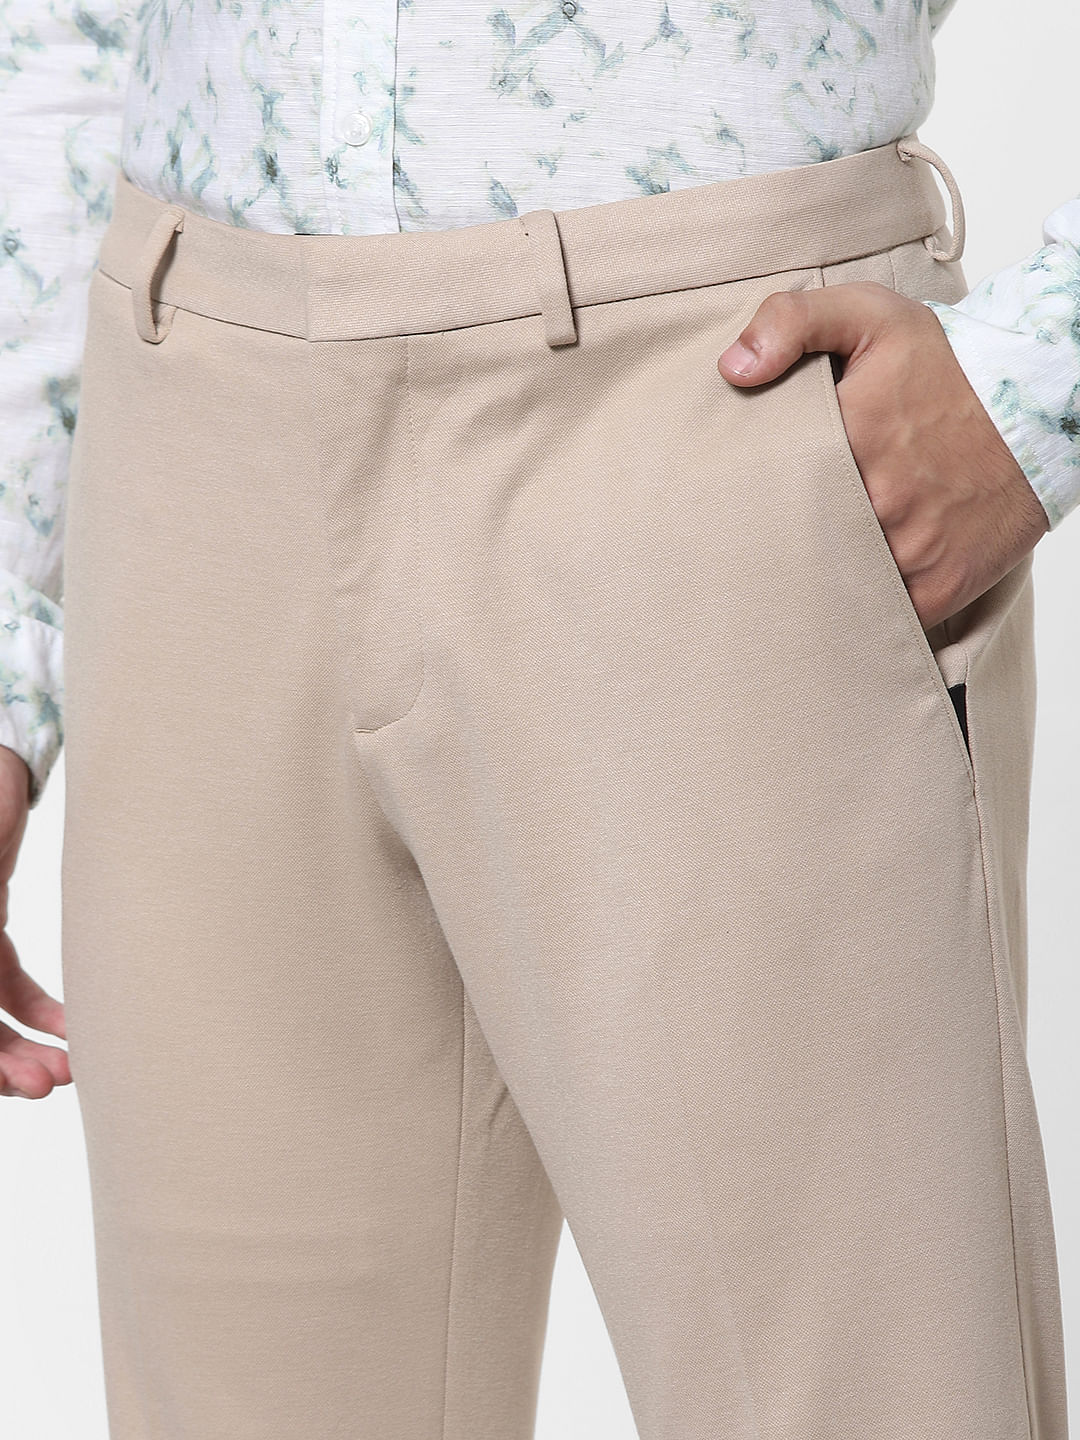 Peter England Casuals Formal Trousers  Buy Peter England Casuals Men Beige  Formal Trousers Online  Nykaa Fashion